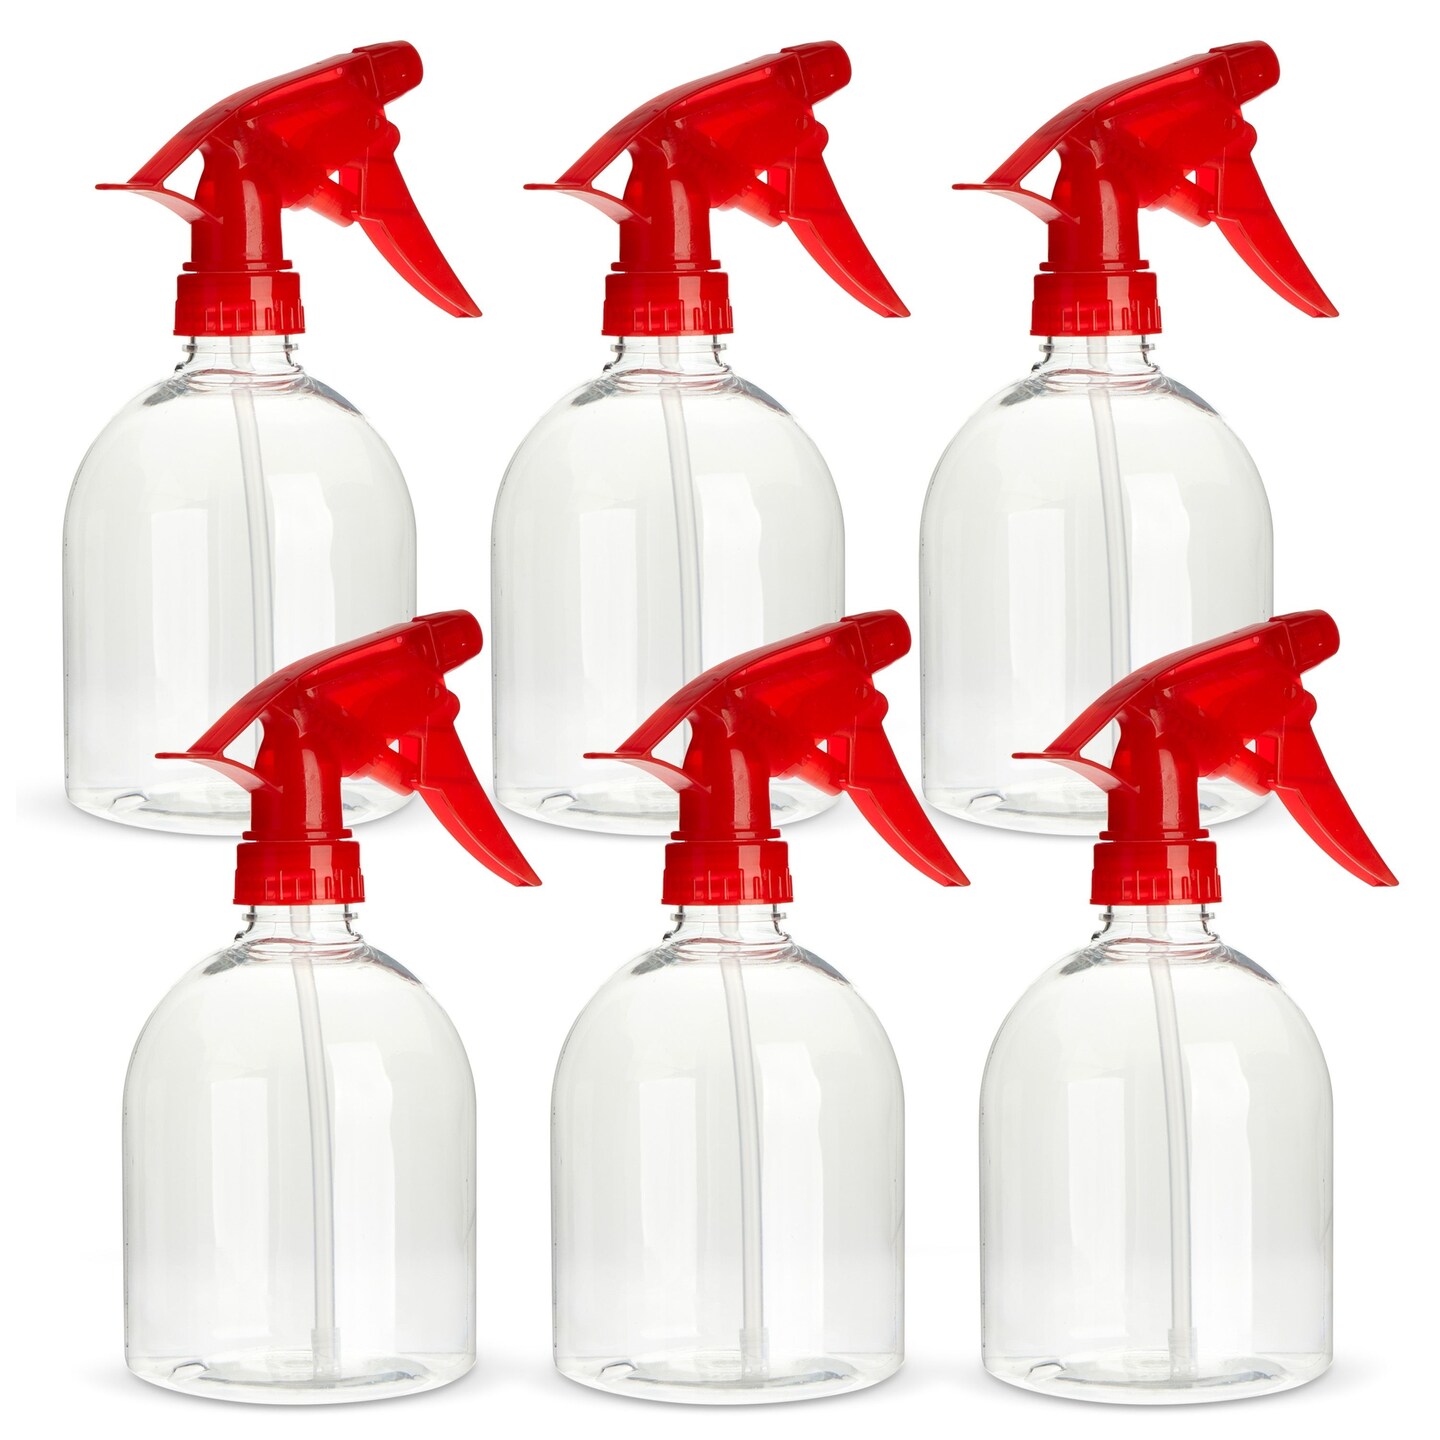 6 Pack Empty Plastic Spray Bottles 16 oz &#x2013; Bulk Red Squirt Water Sprayer for Hair, Cleaning Solutions, and Plants with Adjustable Nozzle and Misting Trigger